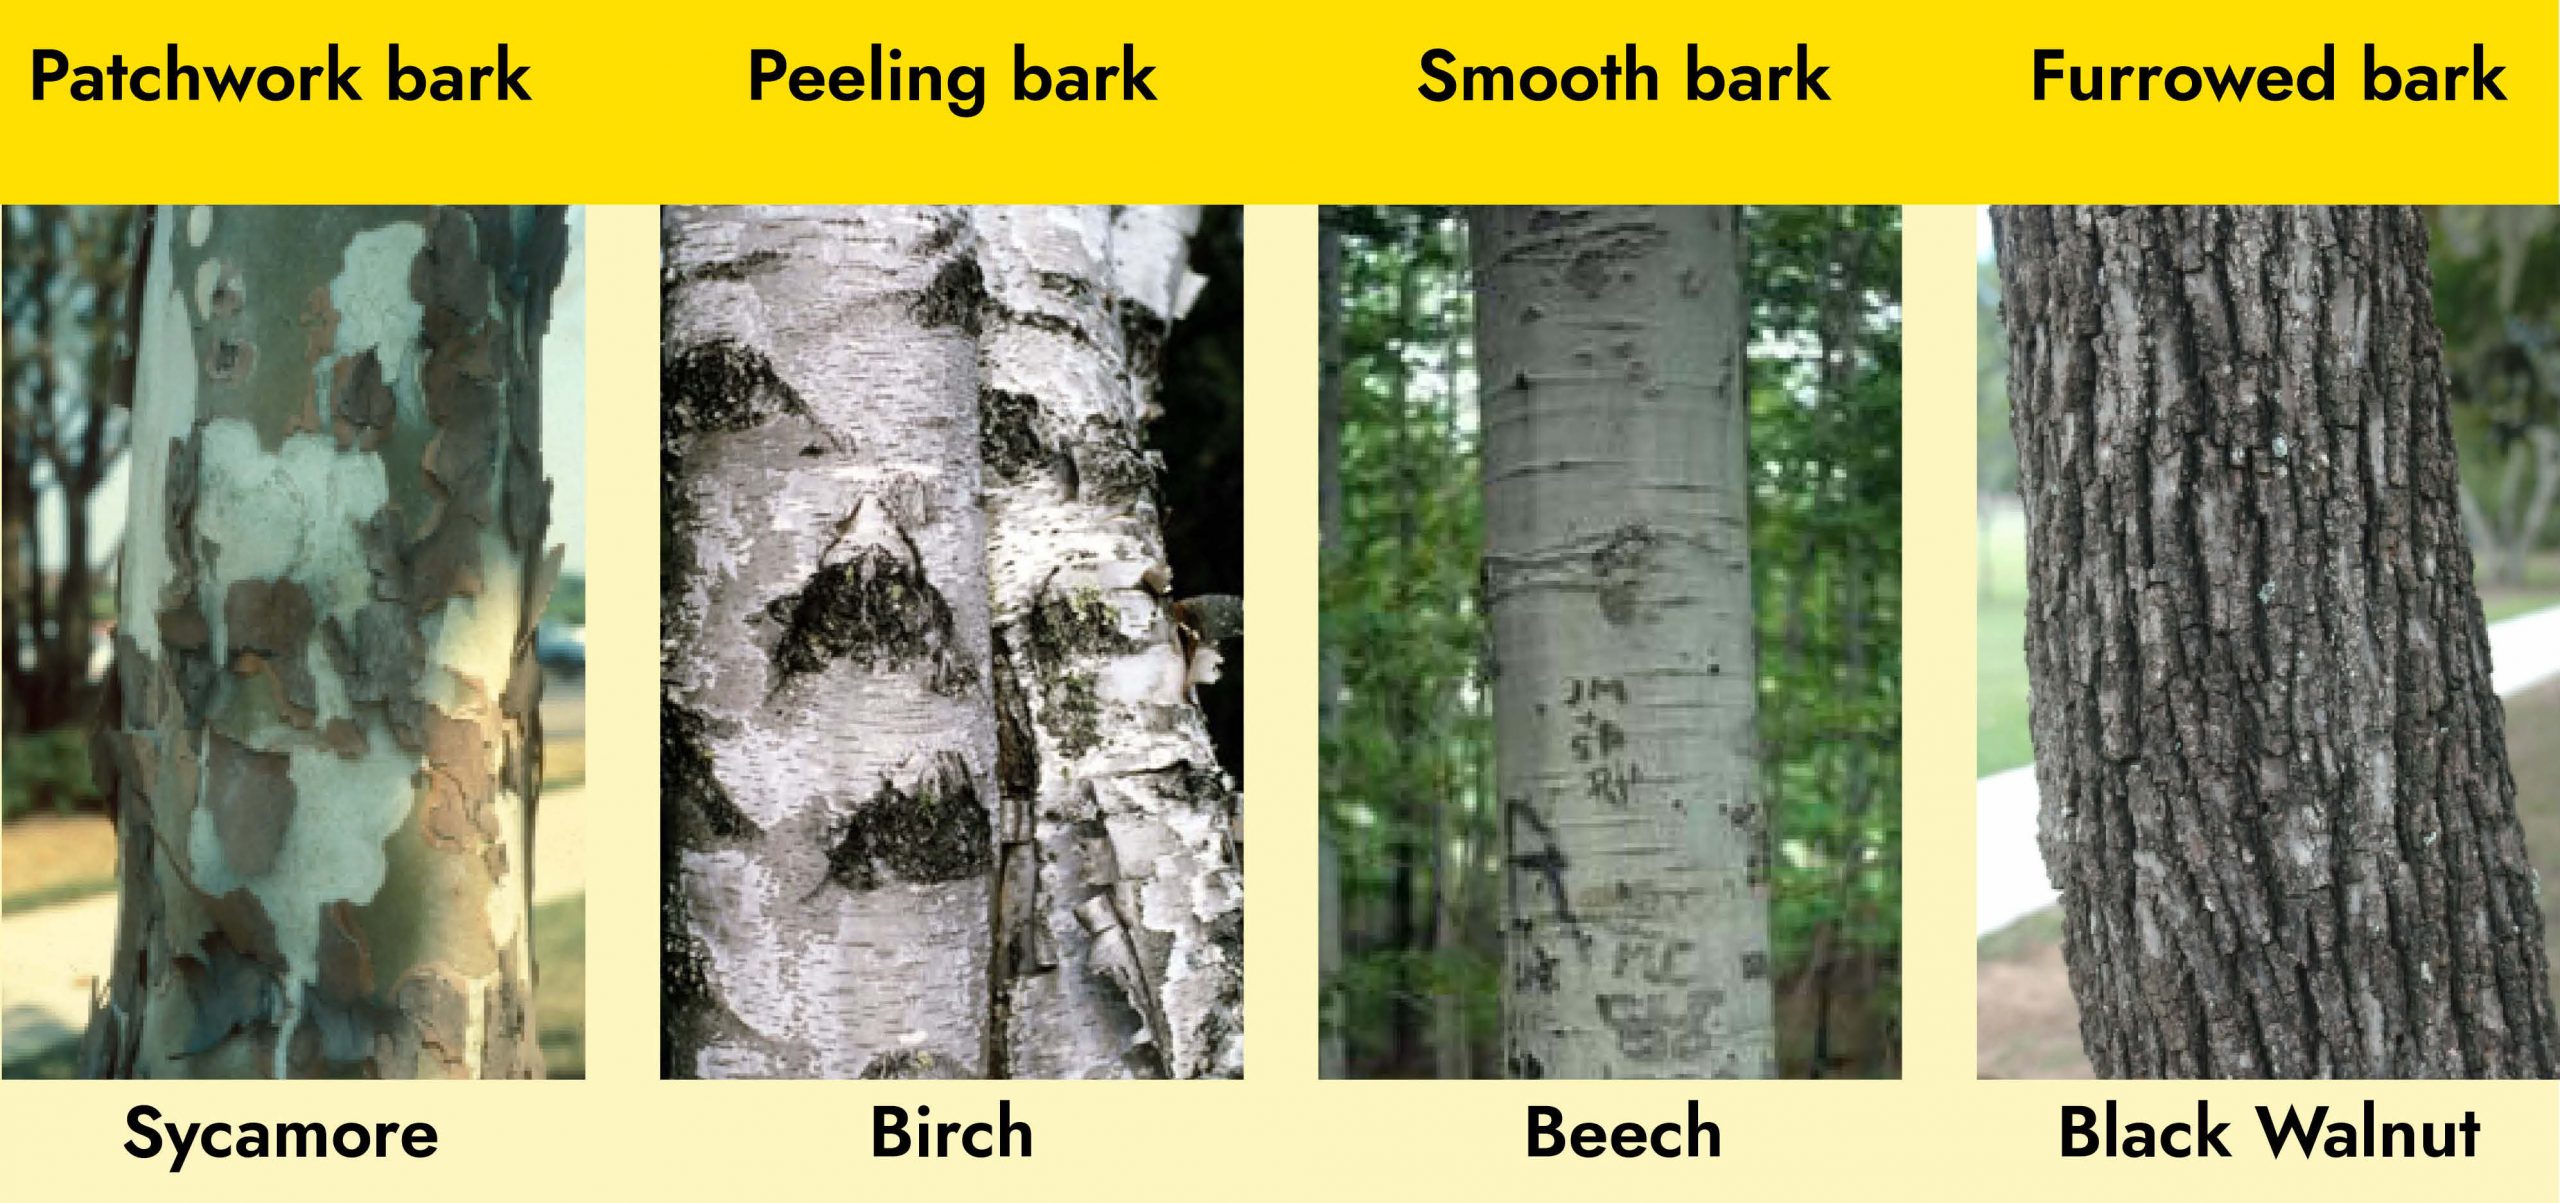 graph depicting 4 types of bark structure. A sycamore with patchy, loose "patchwork bark," a birch with loose and peeling "peeling bark" a beech with uniform grey "smooth bark" and a black walnut with dark brown textured "furrowed bark"